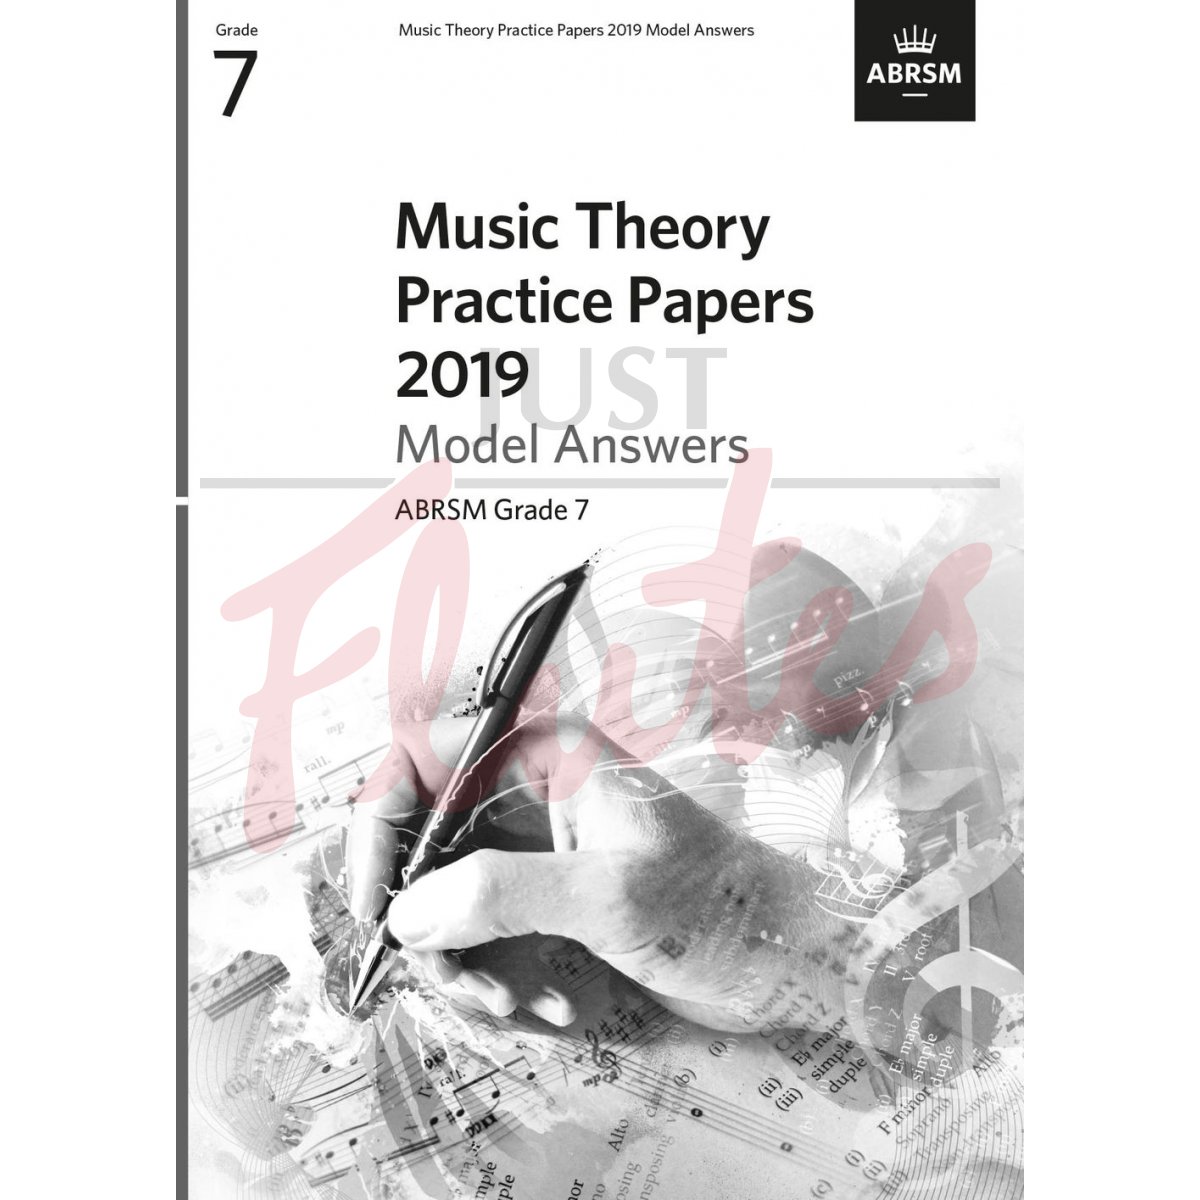 Music Theory Practice Papers 2019 Grade 7 - Model Answers